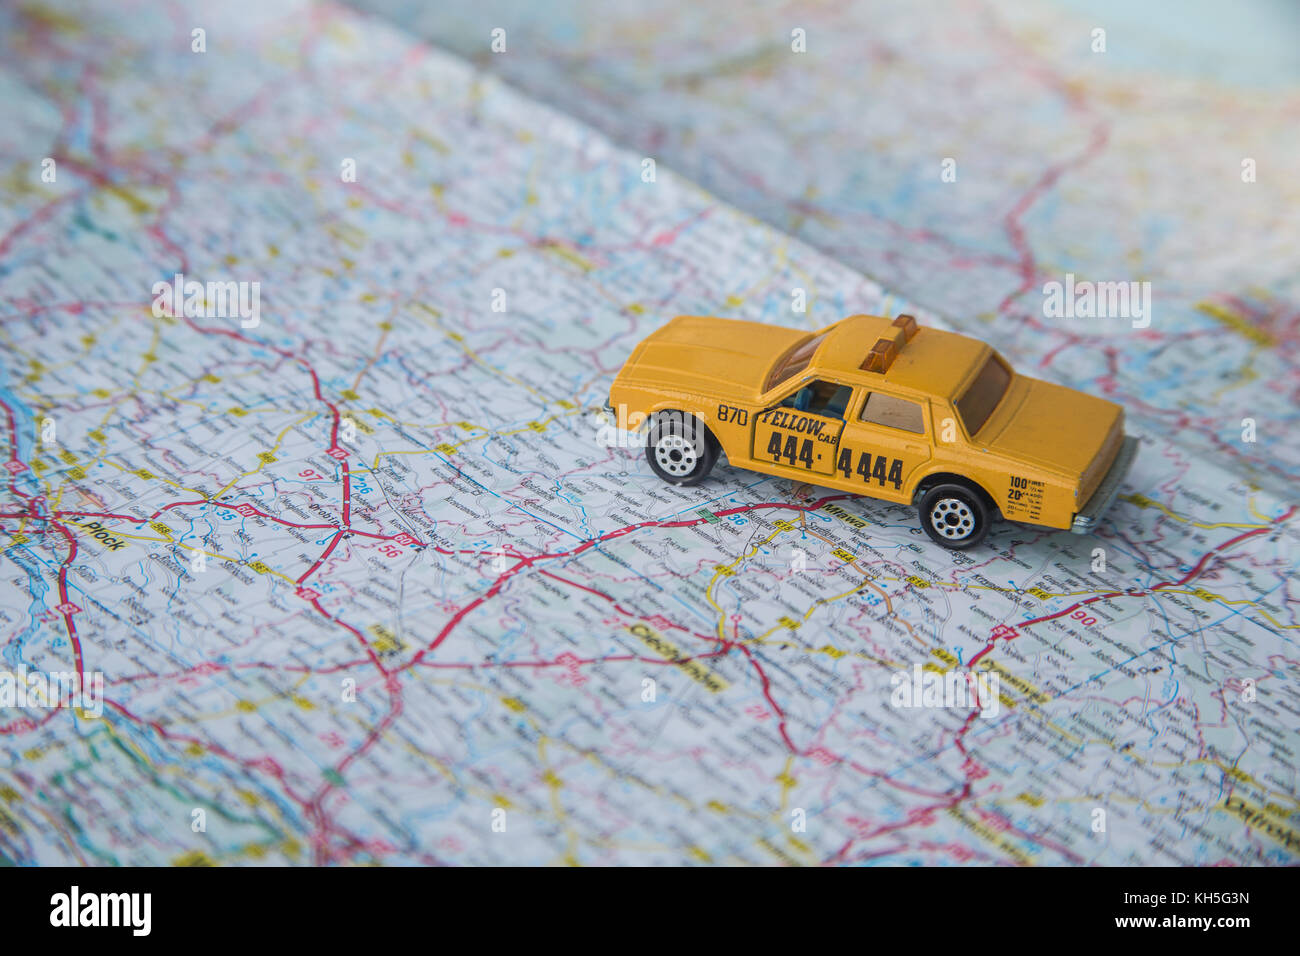 Taxi toy car on a map Stock Photo